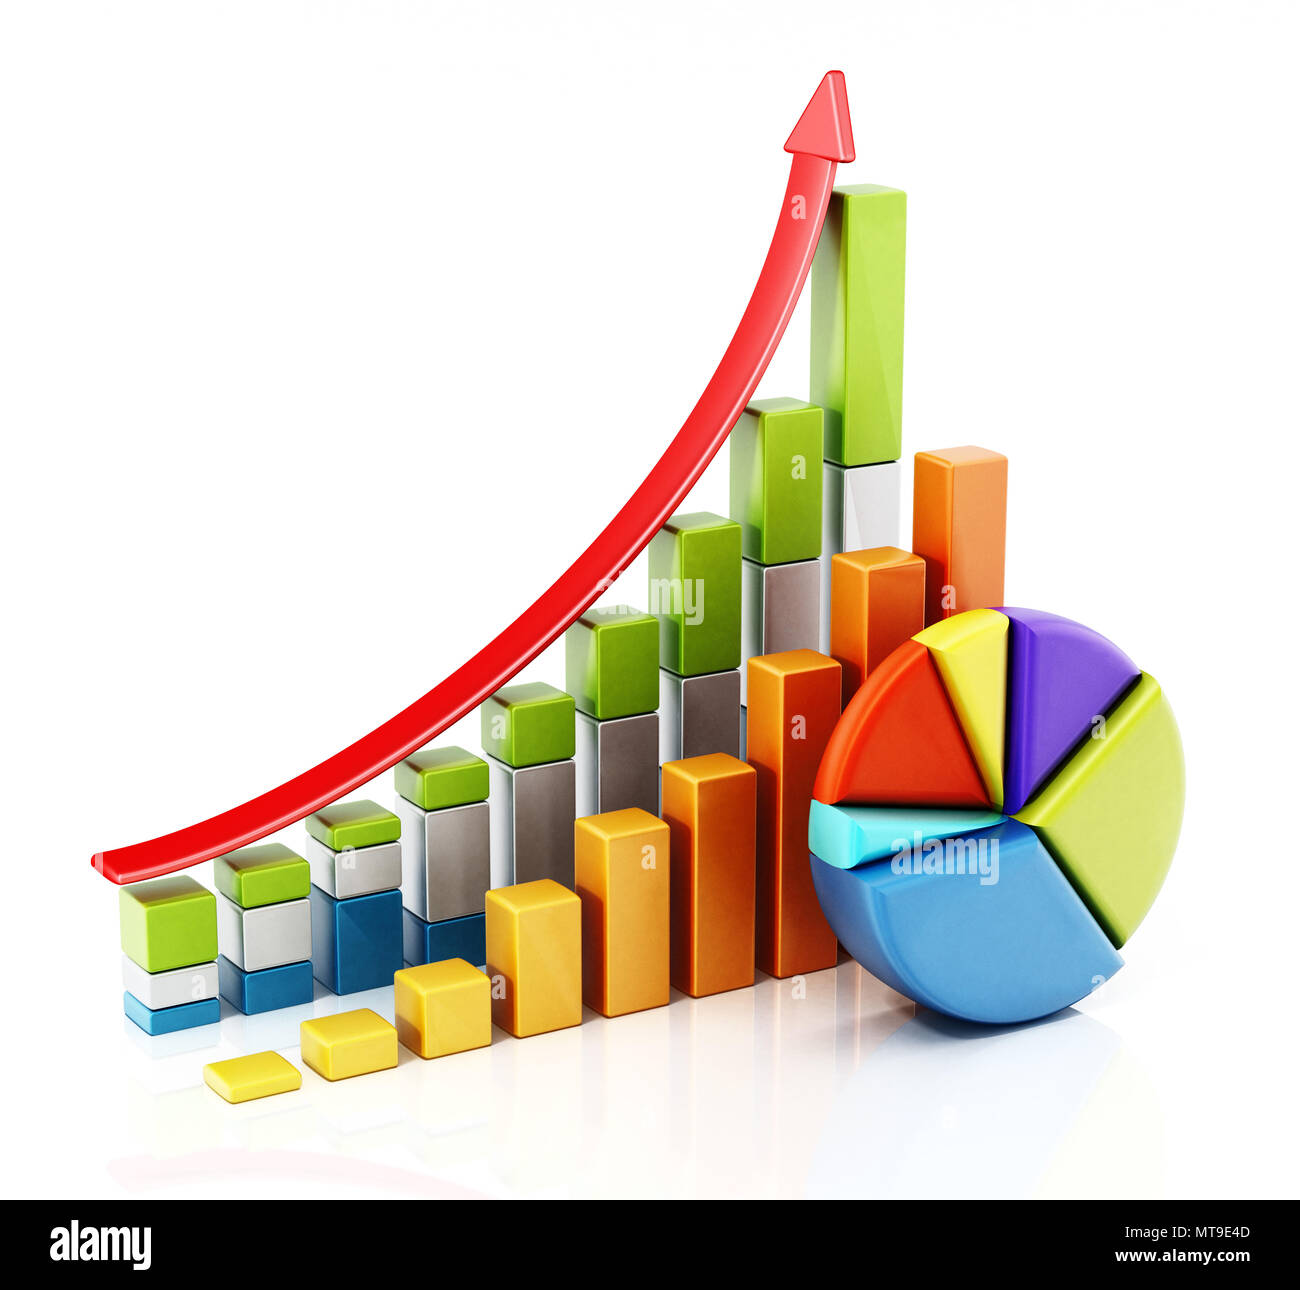 Rising sale bars and pie chart showing financial data. 3D illustration ...